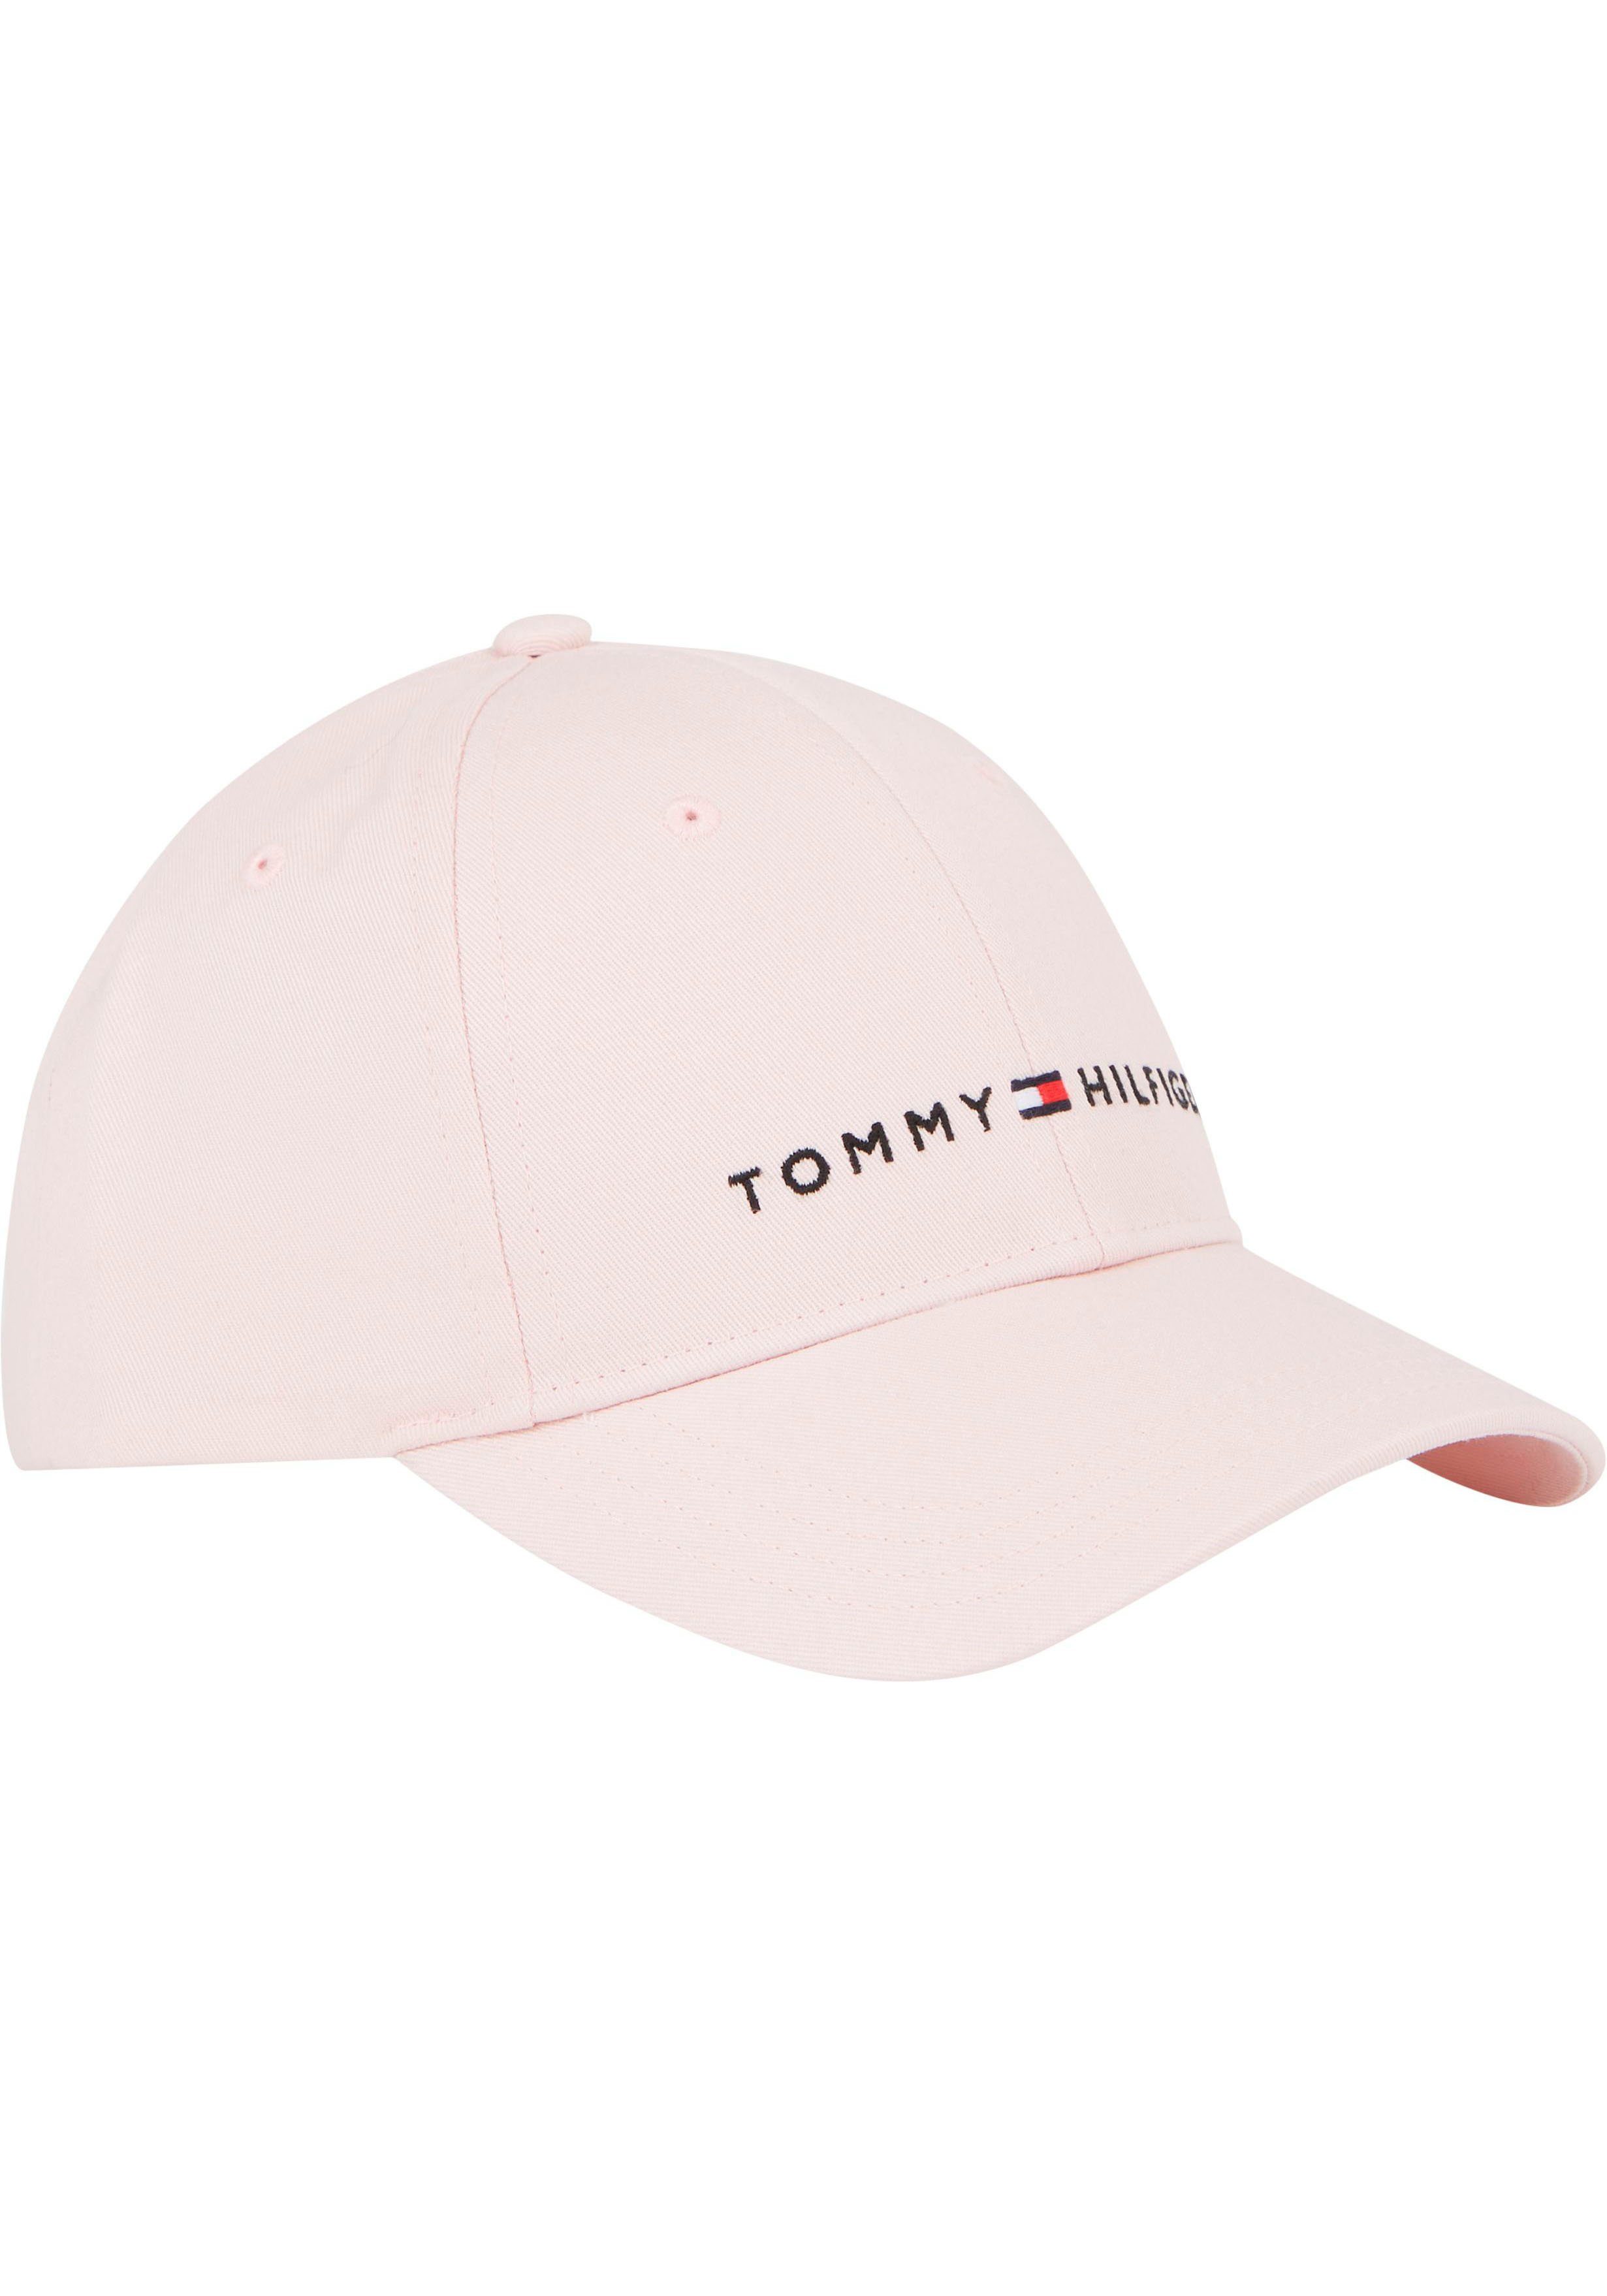 Tommy Hilfiger Fitted cap Essential Cap Unisex